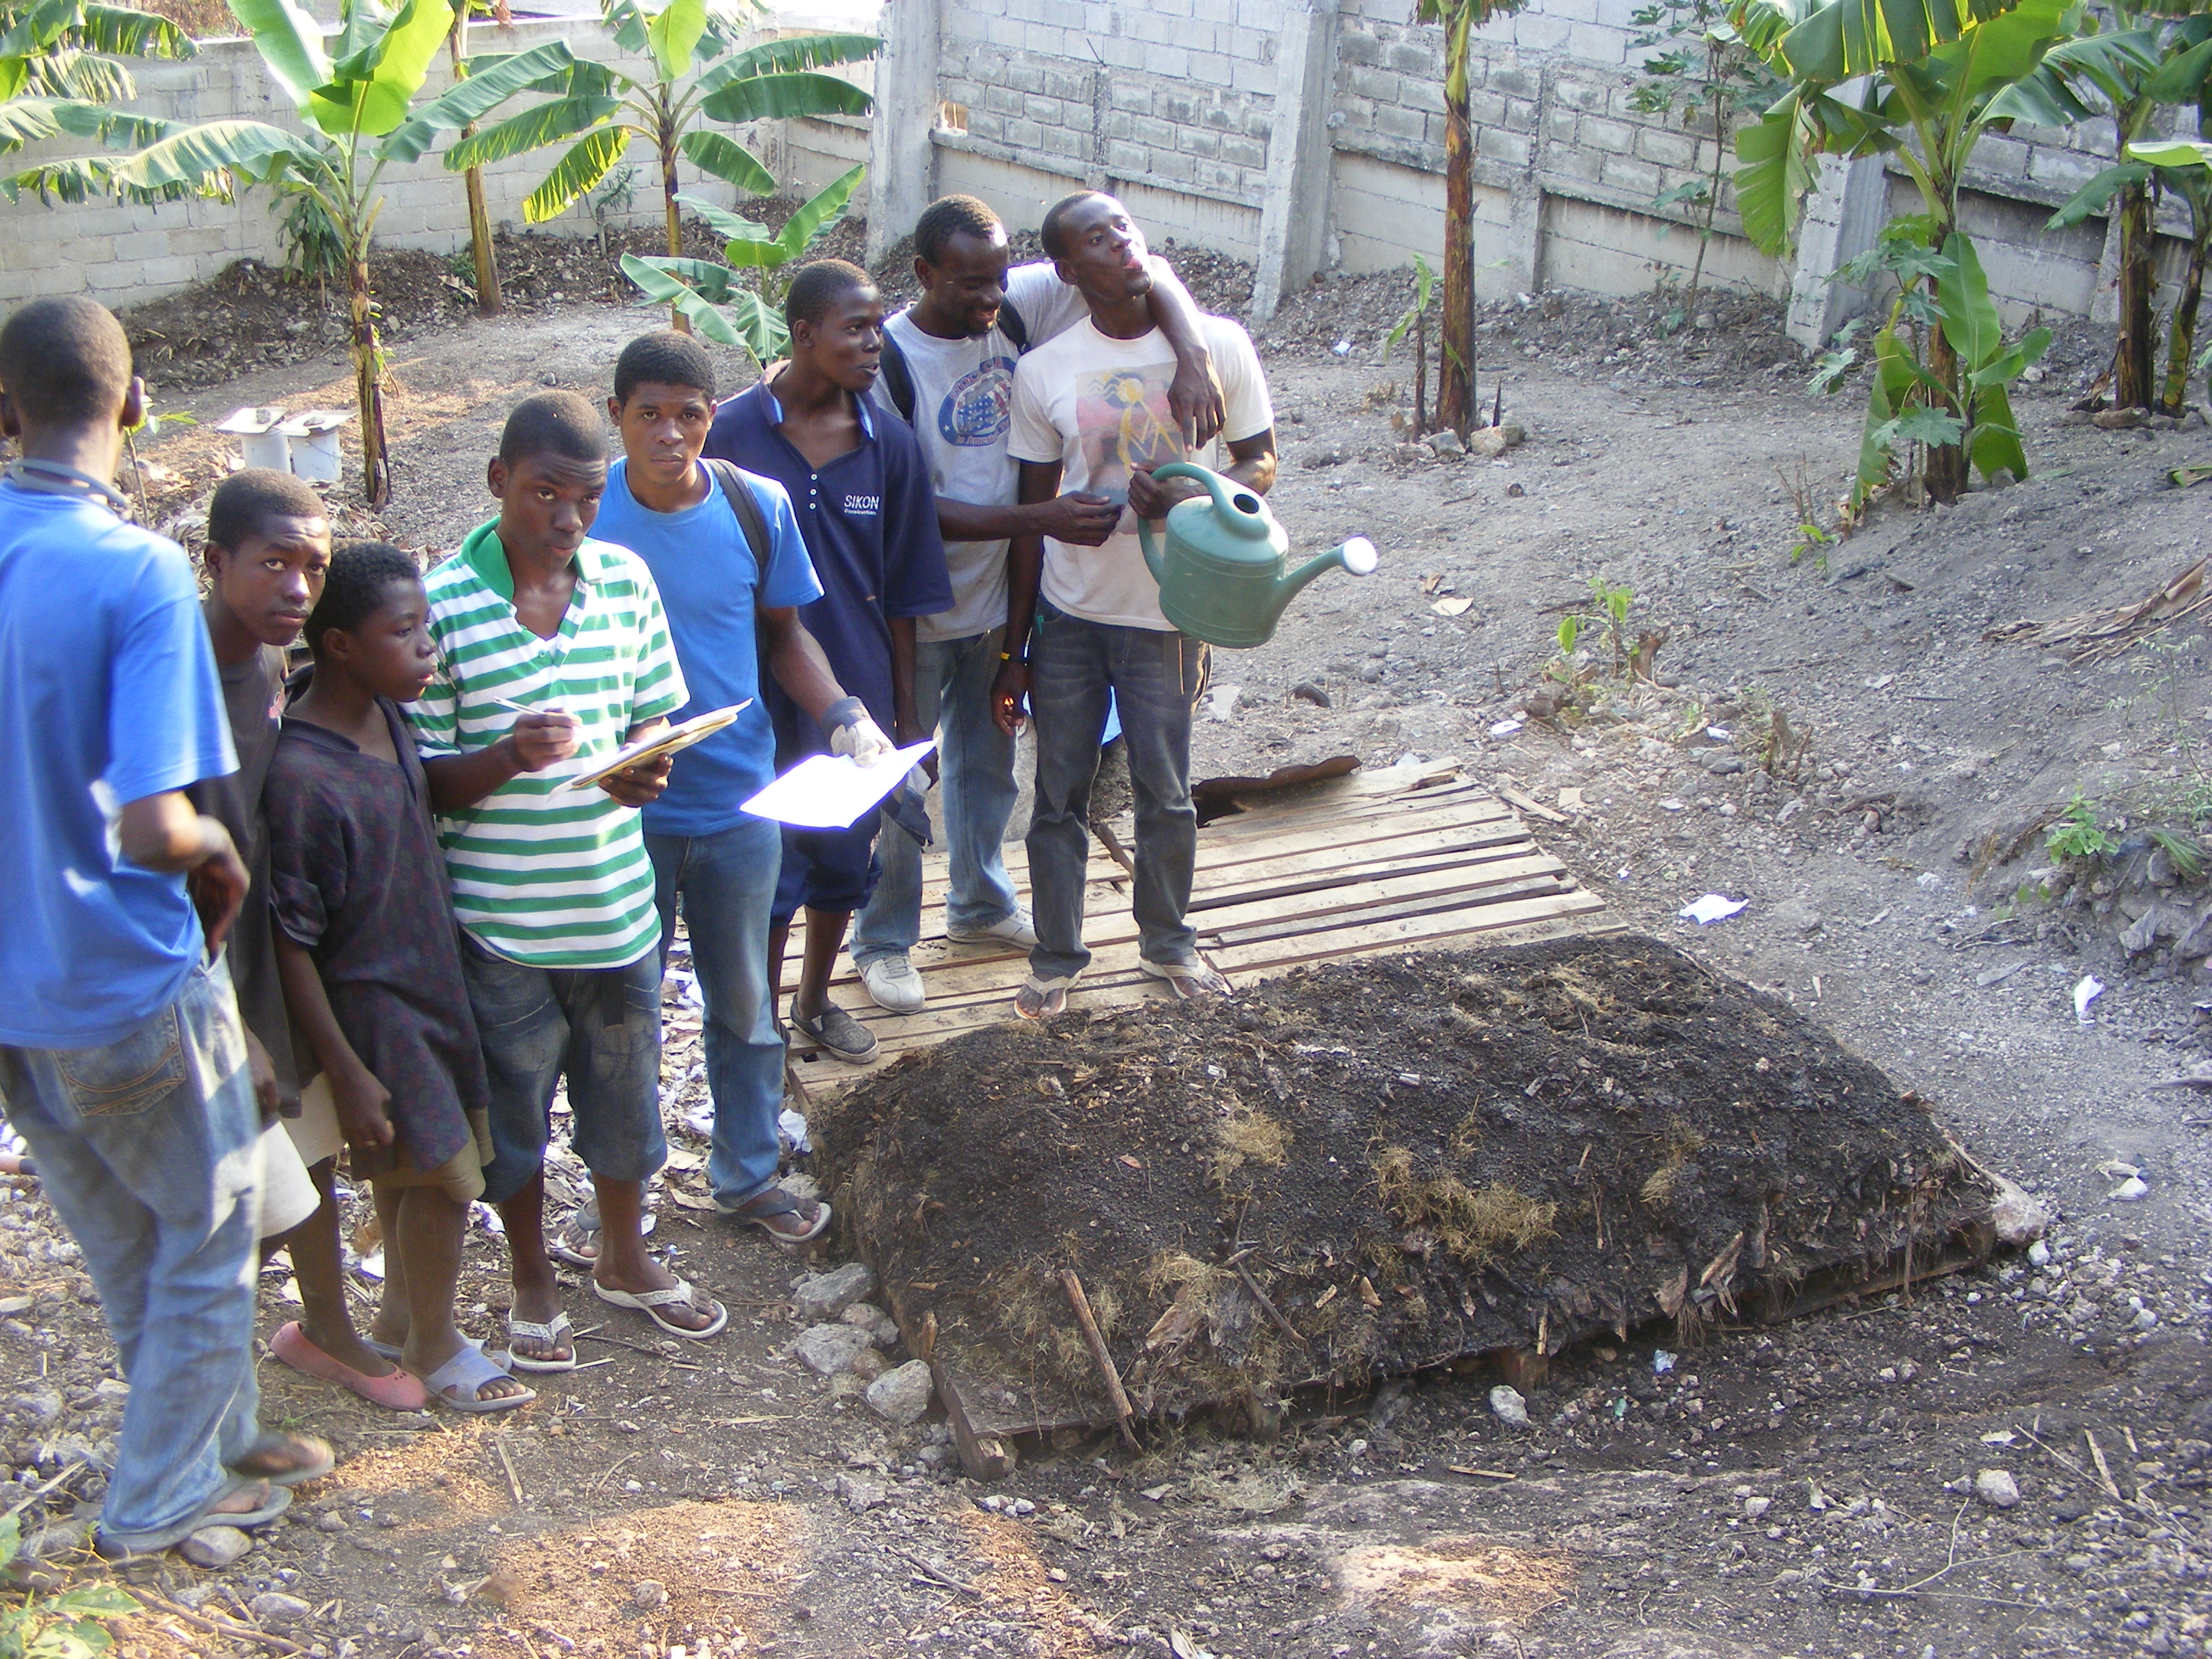 Photo from Haiti where students learn the Howard-Higgins System of DRY sanitation waste management. This saves large amounts of valuable water a...